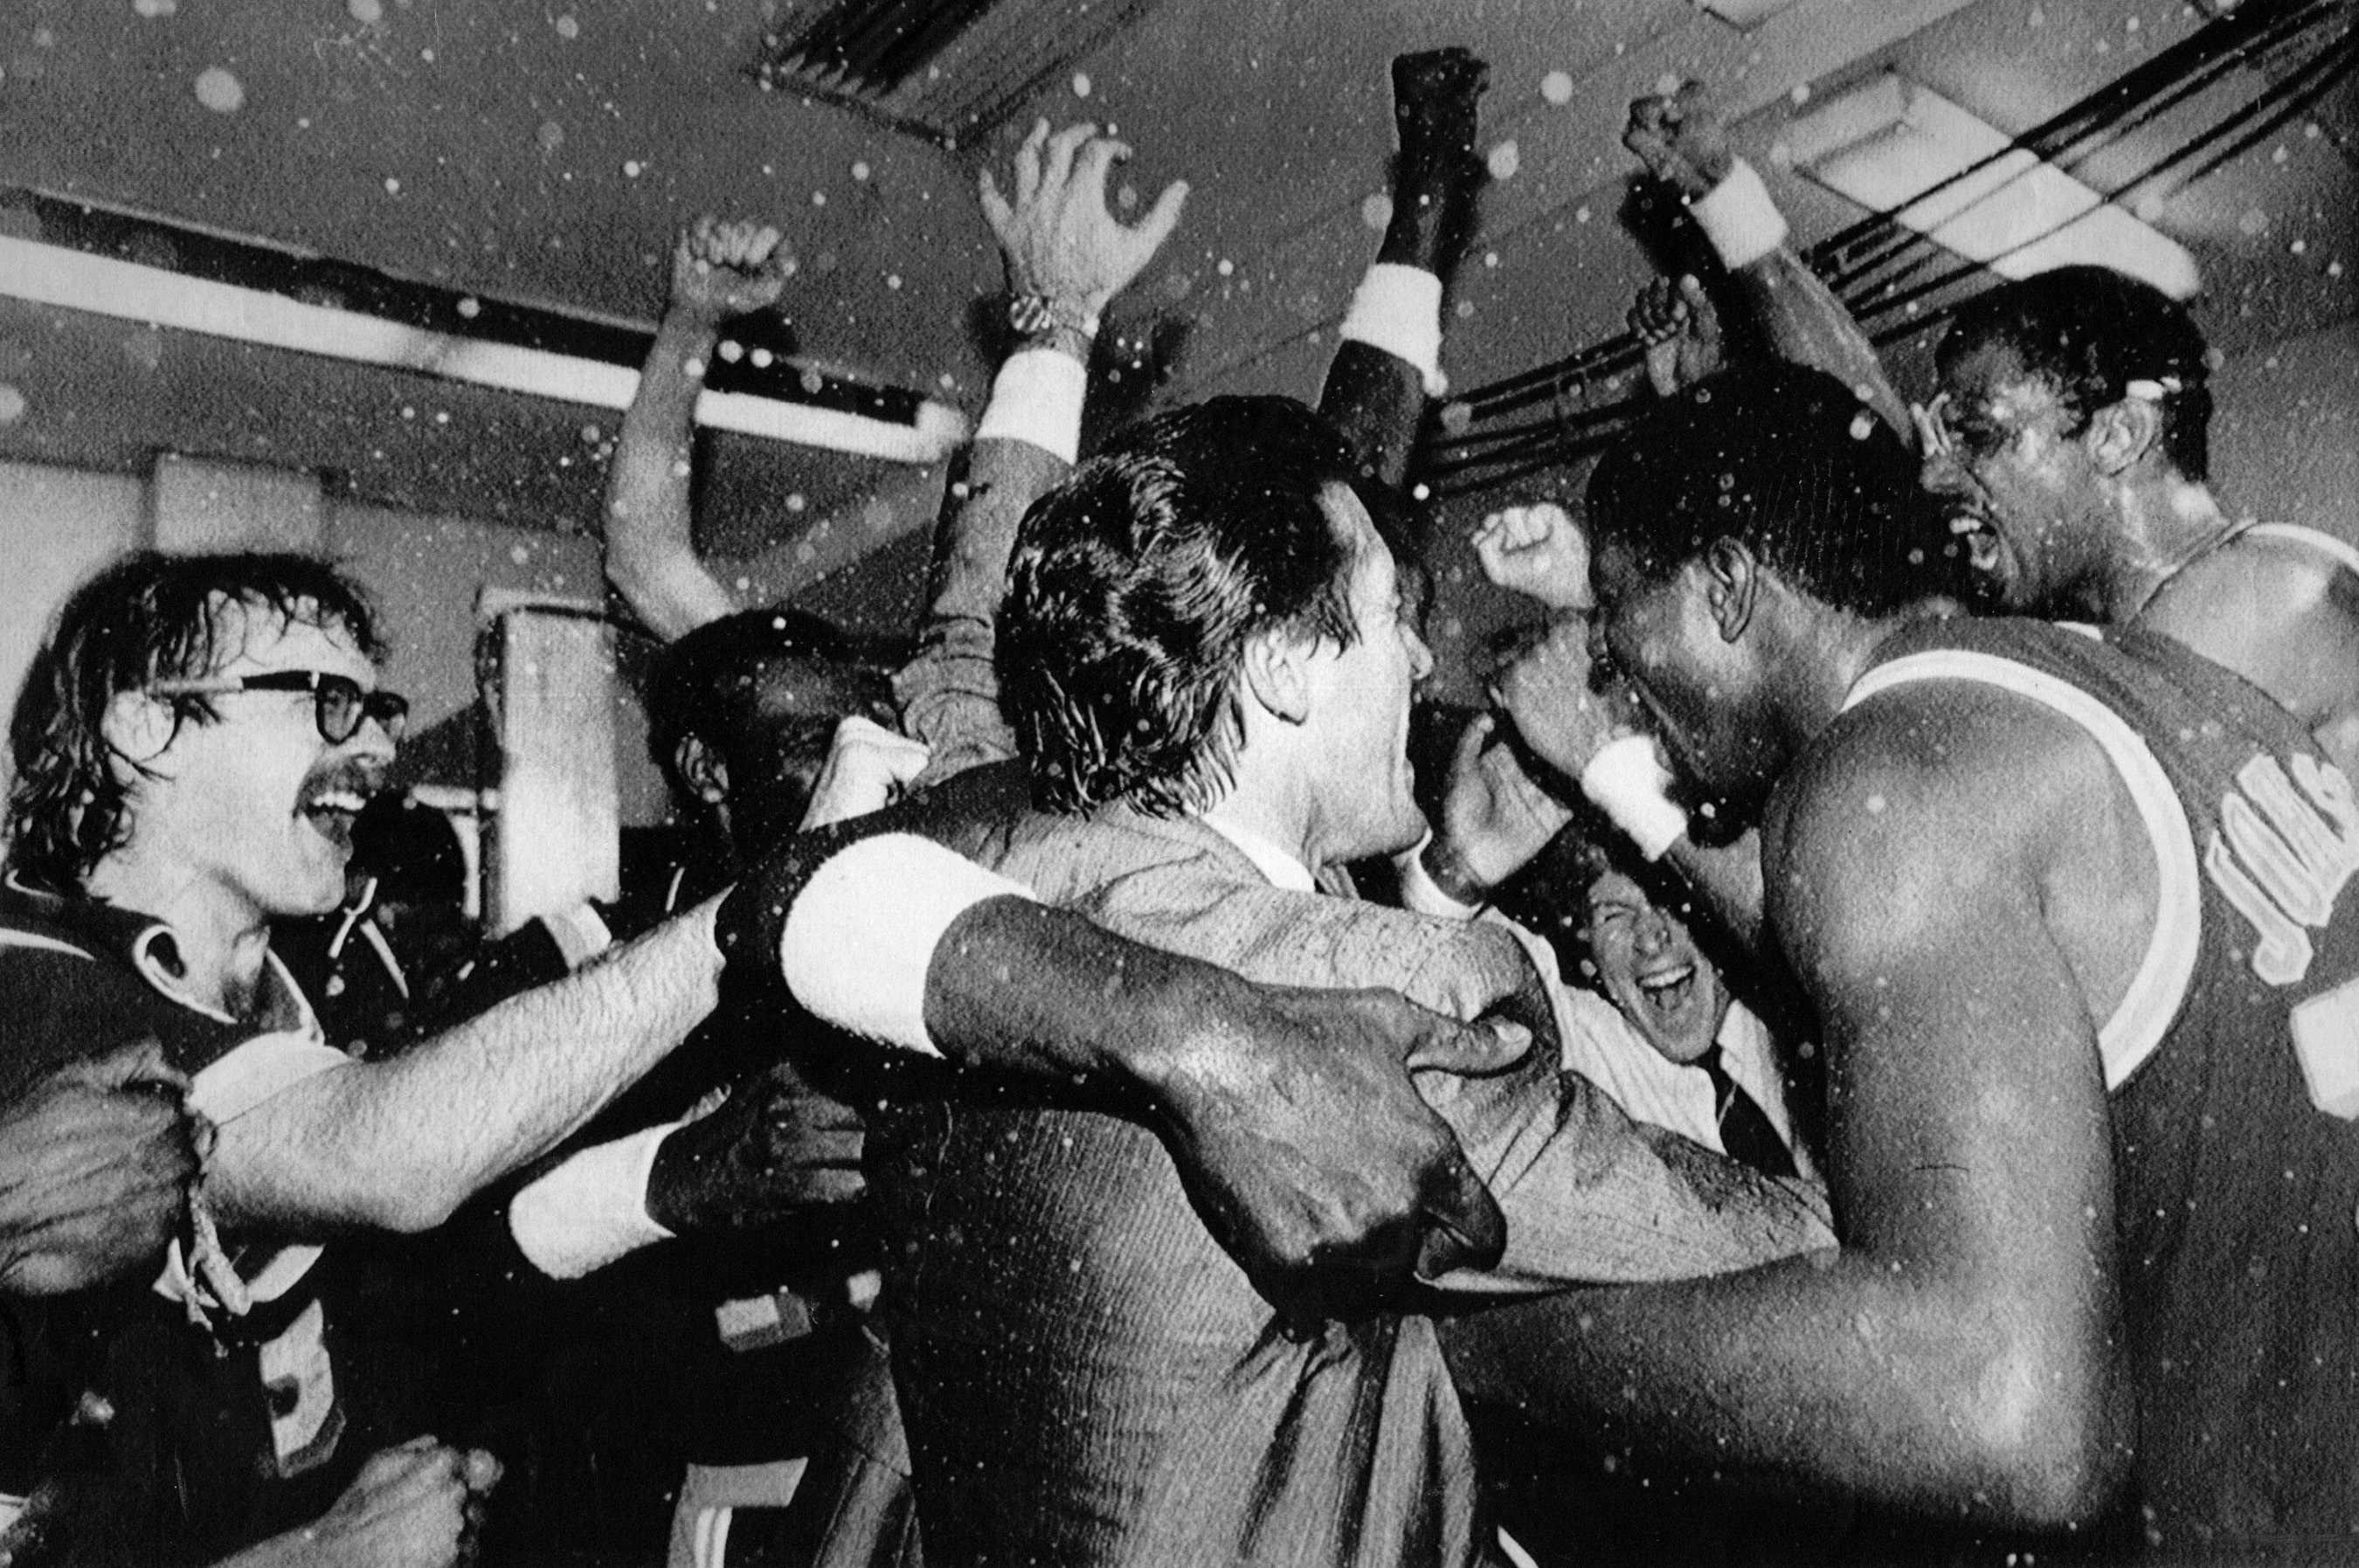 The Lakers' Kurt Rambis, left, Coach Pat Riley, center, and Magic Johnson, right, celebrate with the rest of the team.